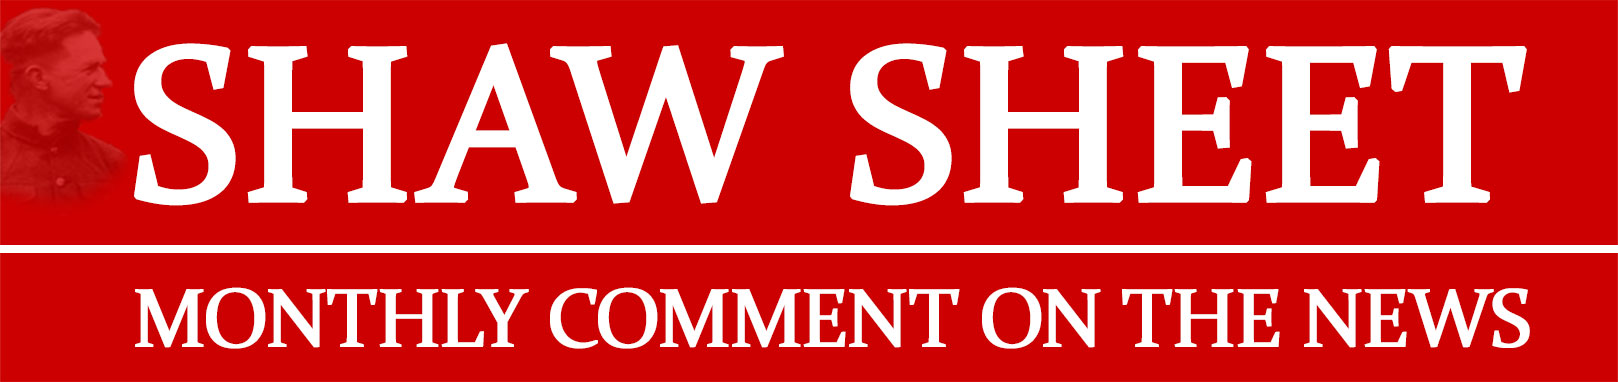 Shaw Sheet Logo with Monthly Comment on the News strapline